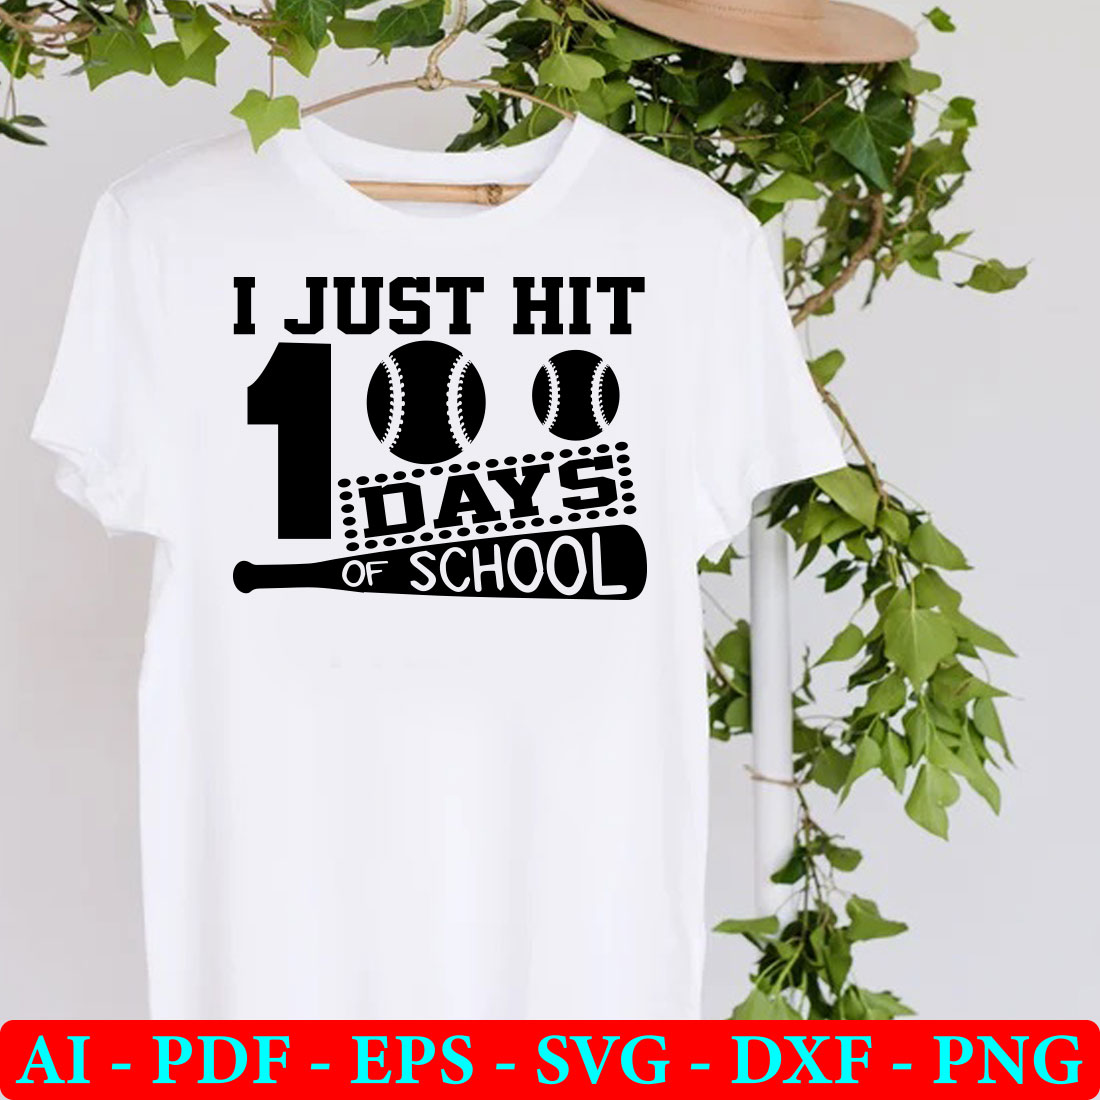 T - shirt that says i just hit ten days of school.